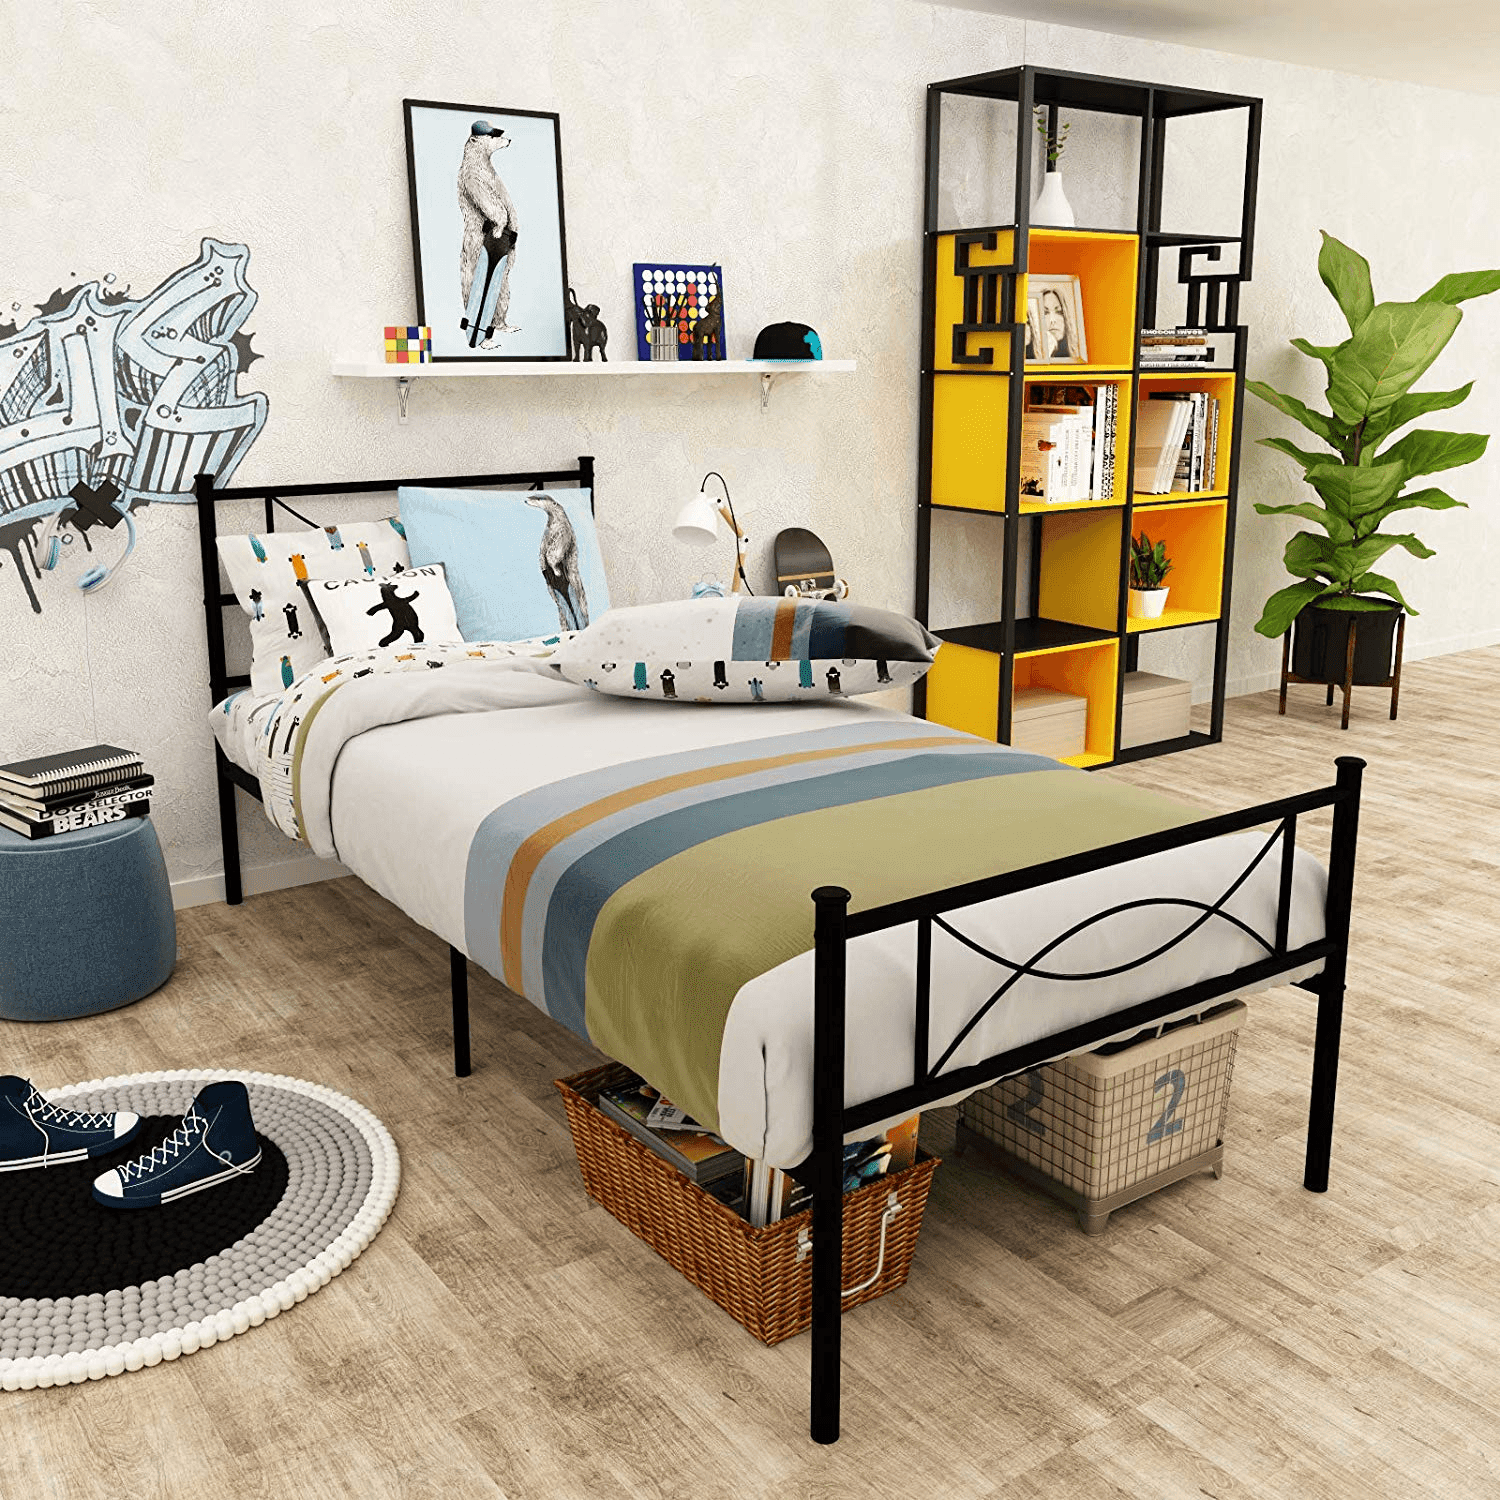 Yoneston Twin Size Metal Platform Bed with Bowknot Headboards Easy Assembly (Mattress Not Included)